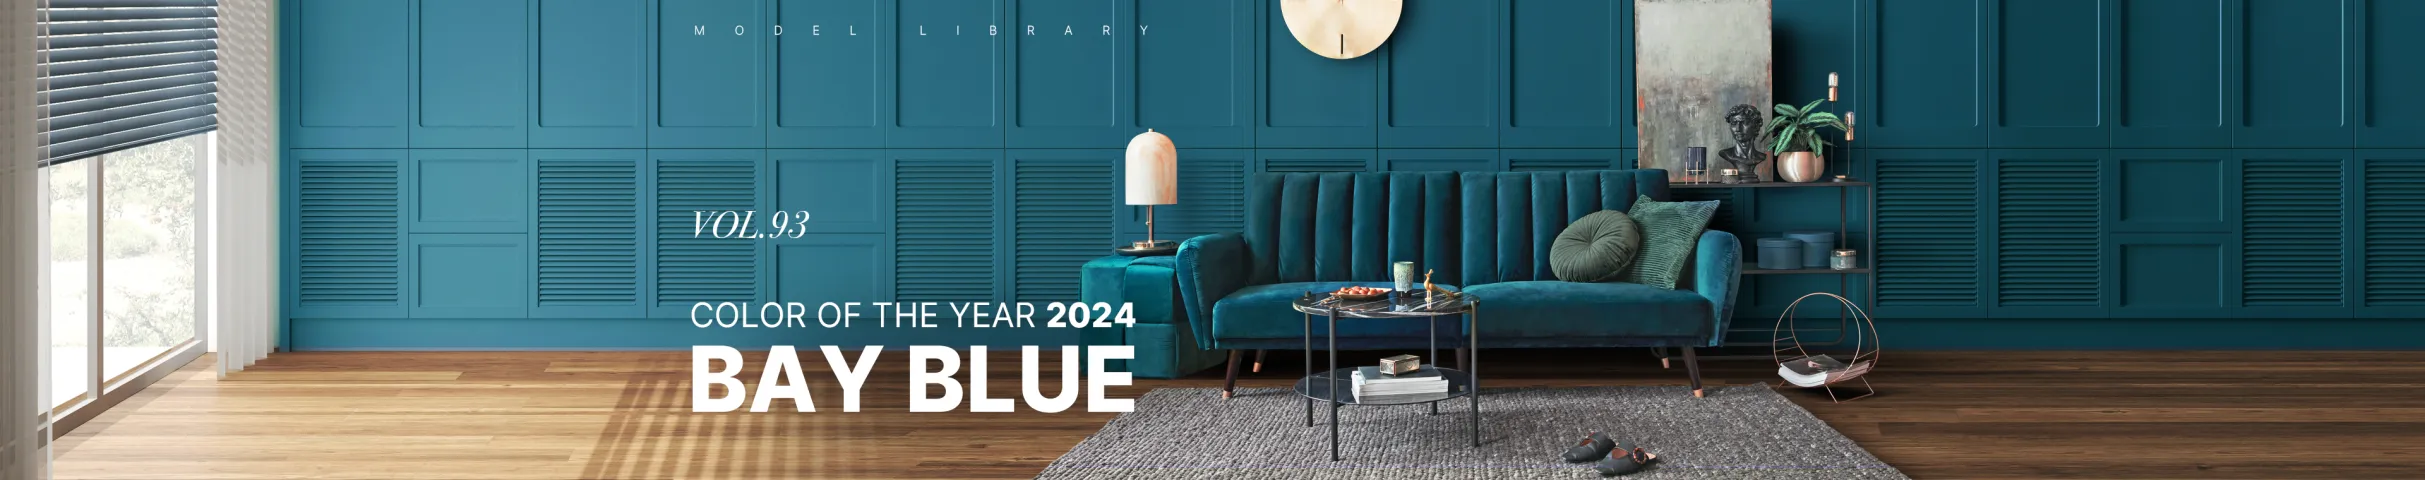 COLOR OF YEAR 2024 BAY BLUE